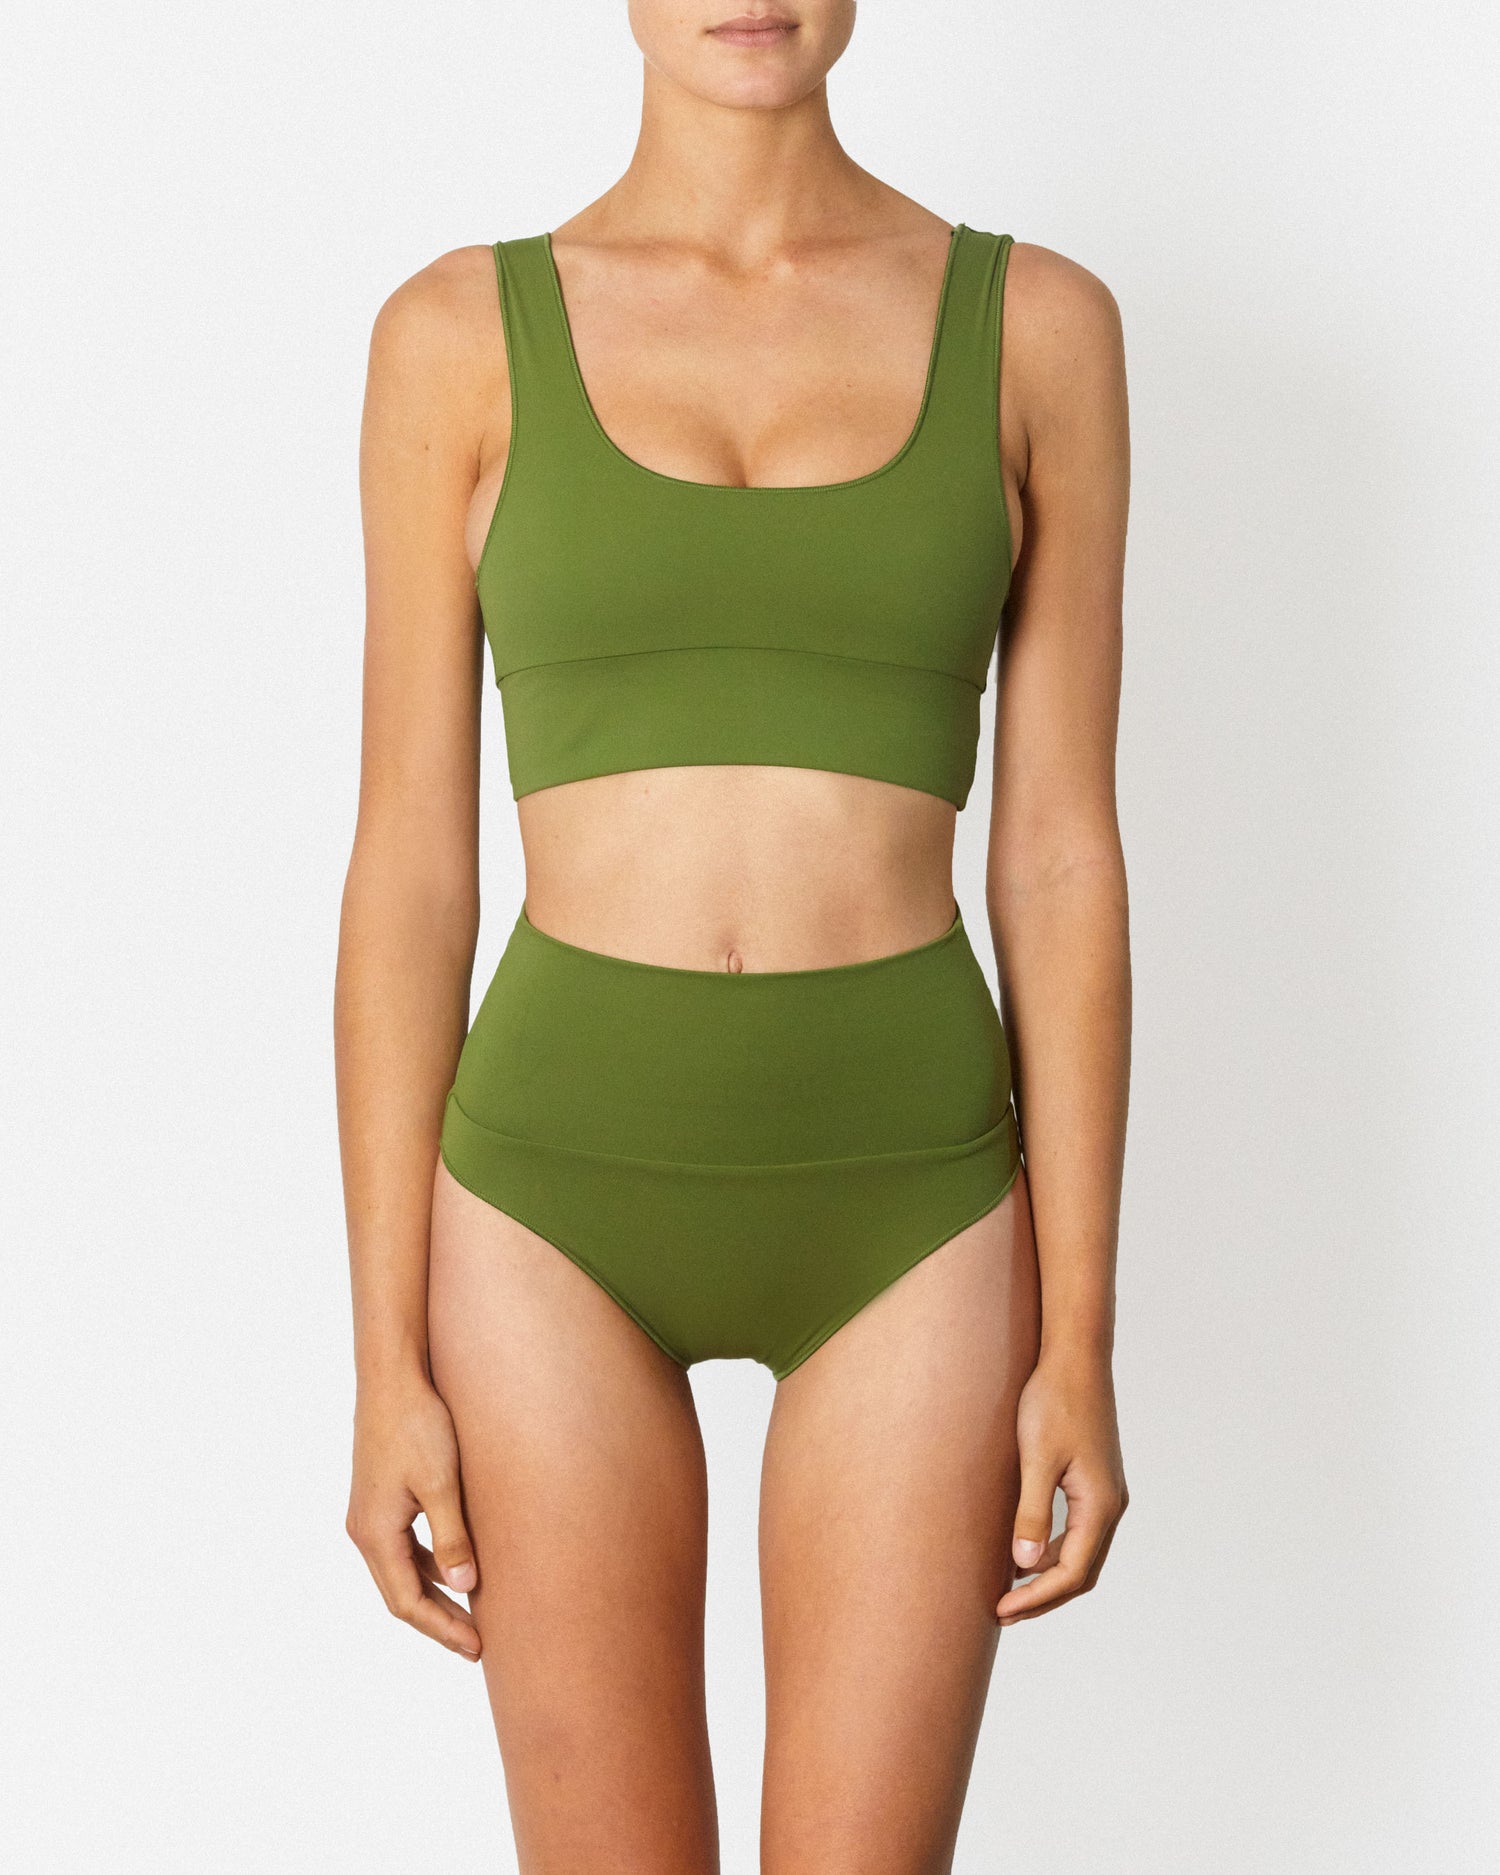 On body front of the Contour High Waist Pant - Pesto